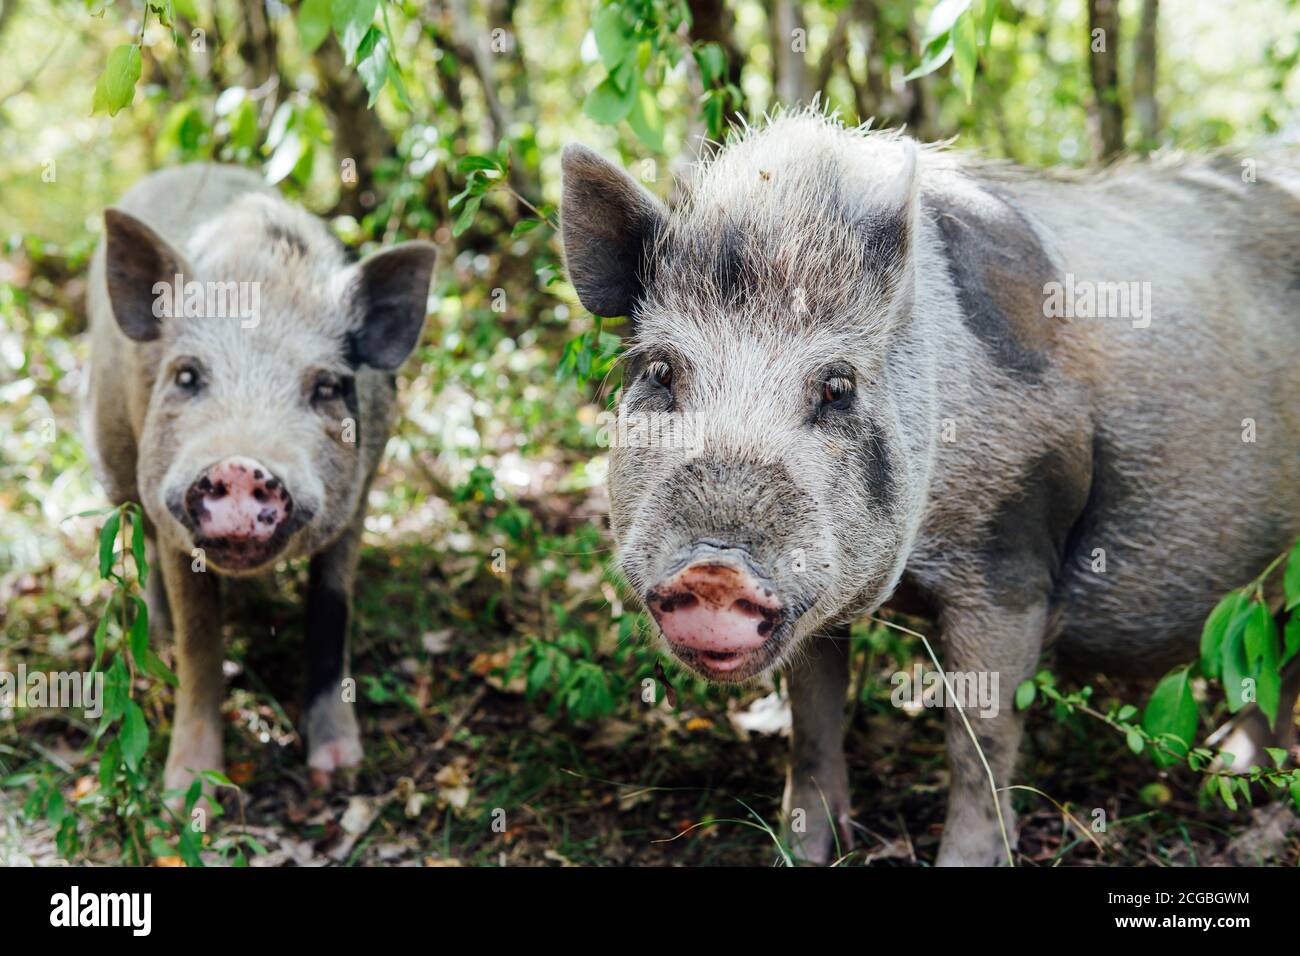 Two wild boar pig pigs in the woods Stock Photo